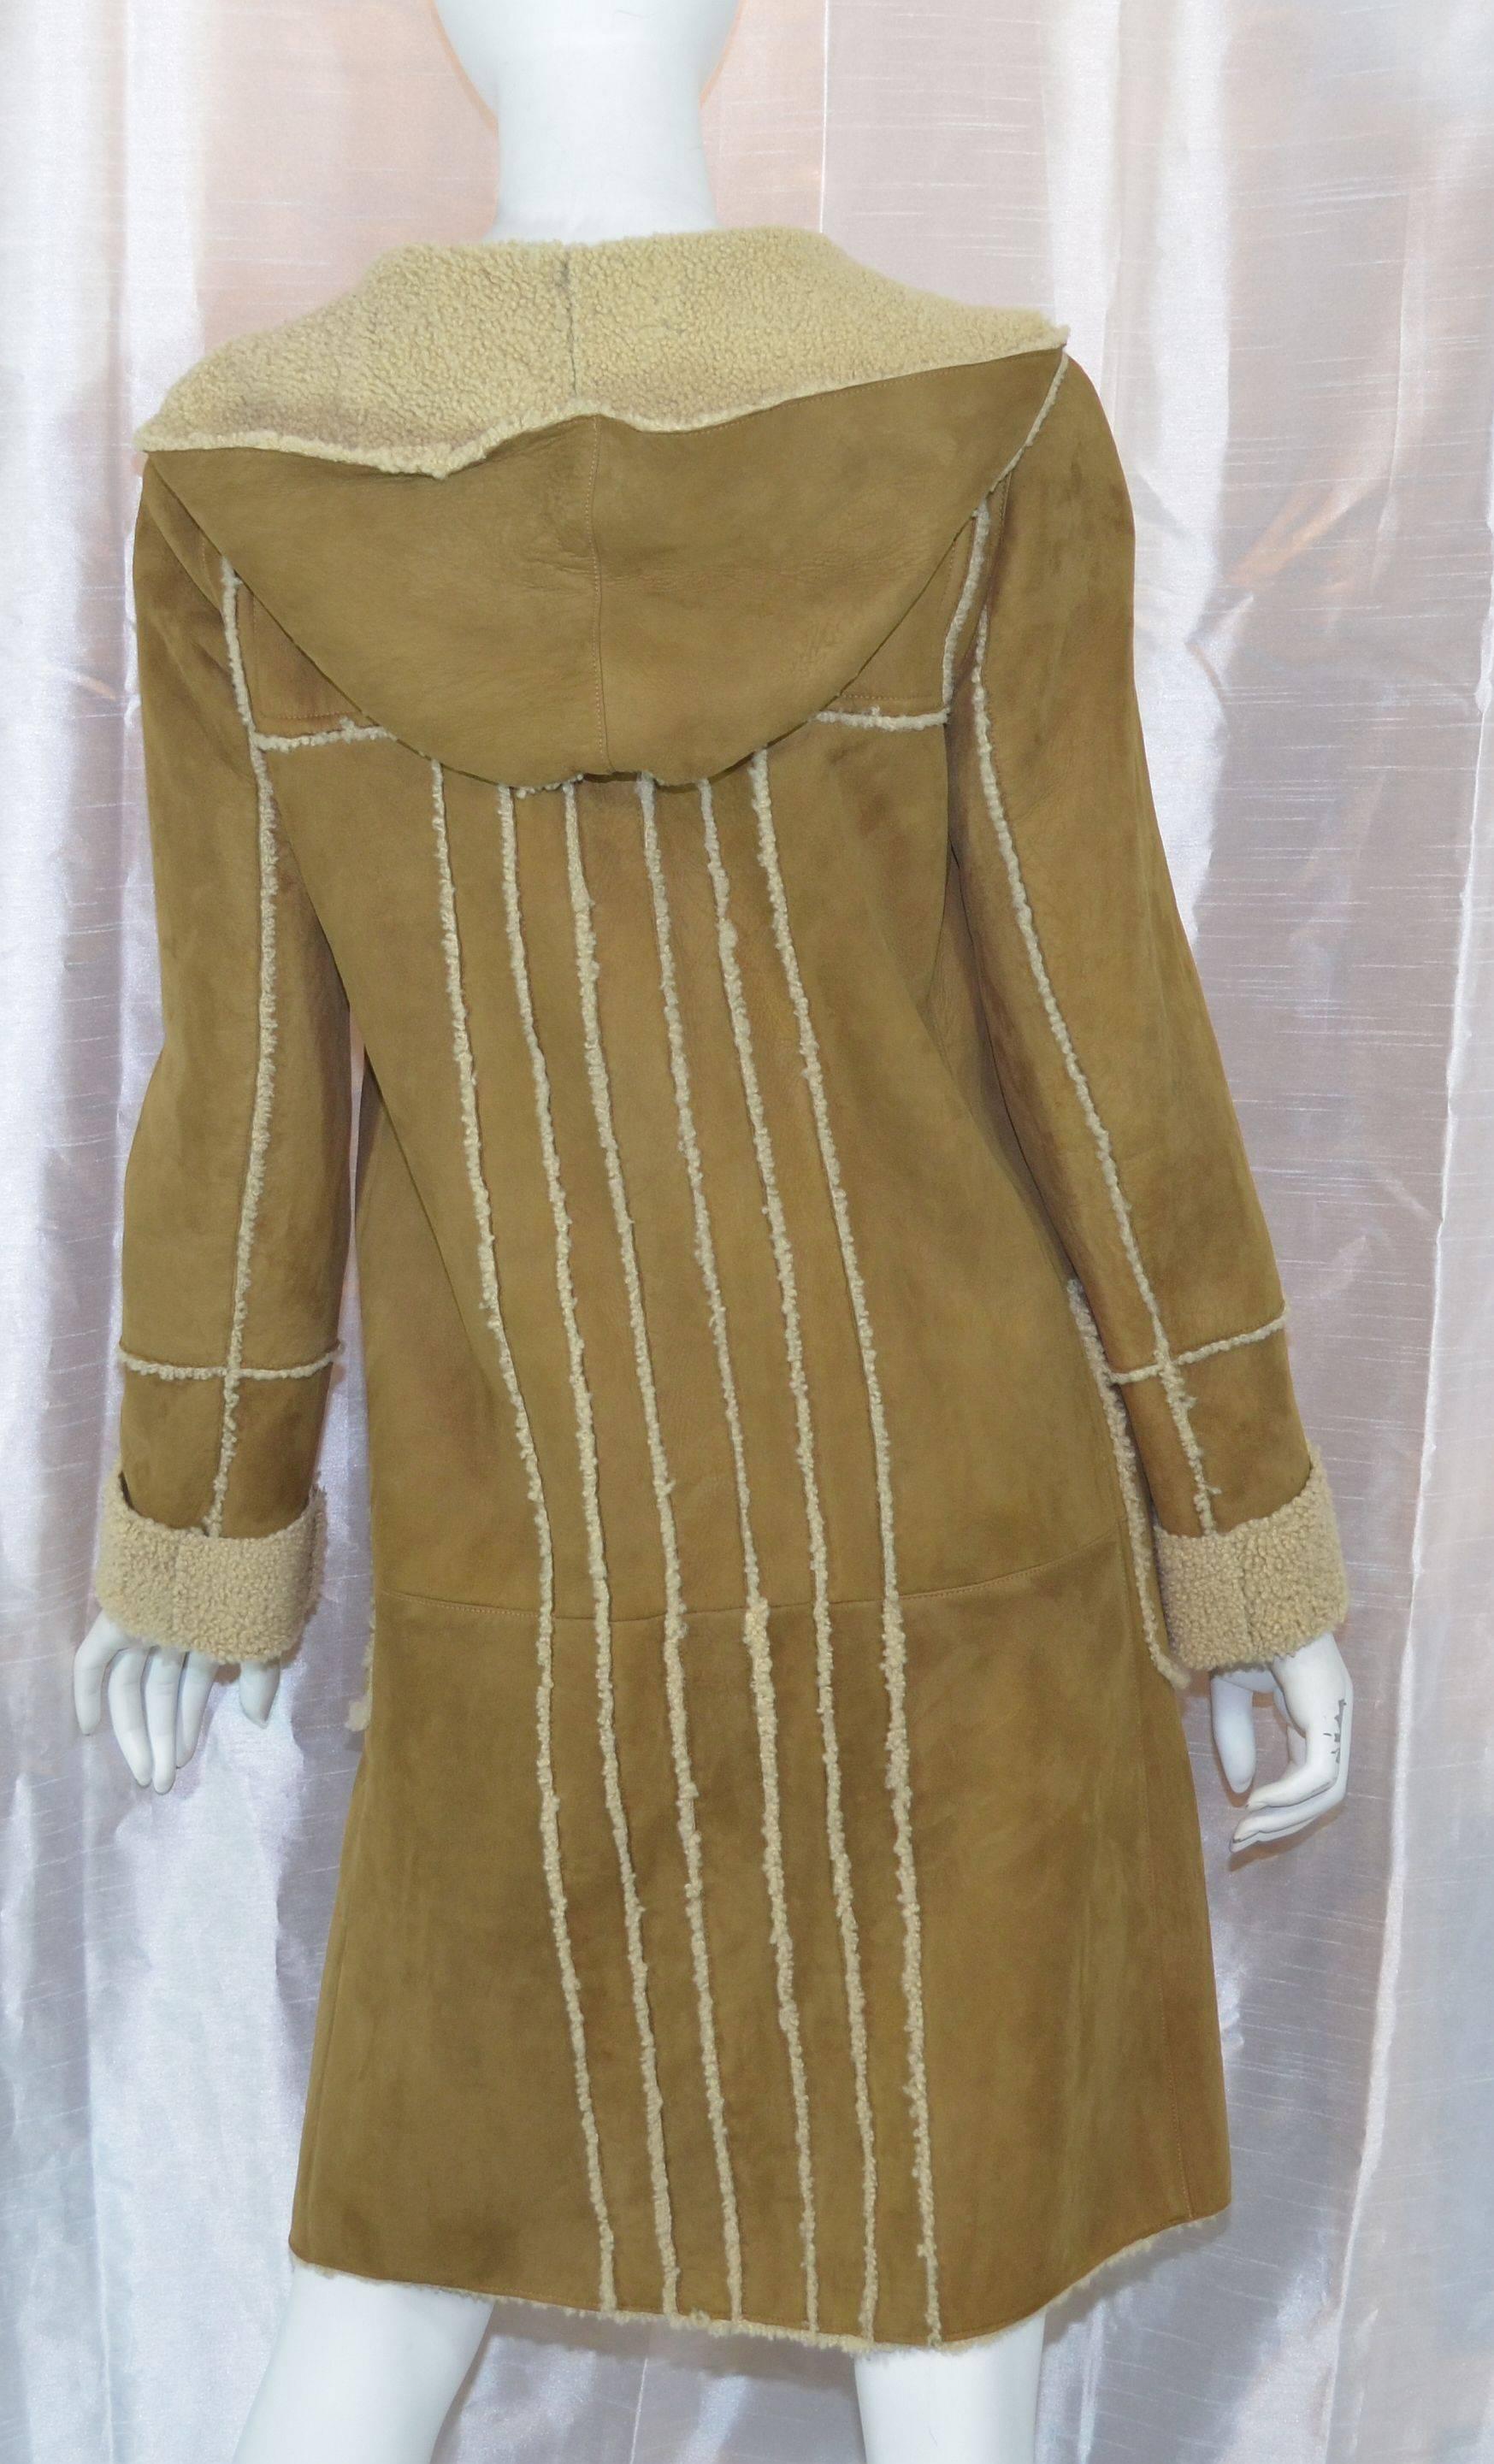 Gorgeous Chanel coat from '06 A collection. Coat is 100% shearling lambswool featured in a light brown color with signed CC logo toggle closures along the front, with two patch pockets at the waist. Labeled a size 36, made in France. Measurements at